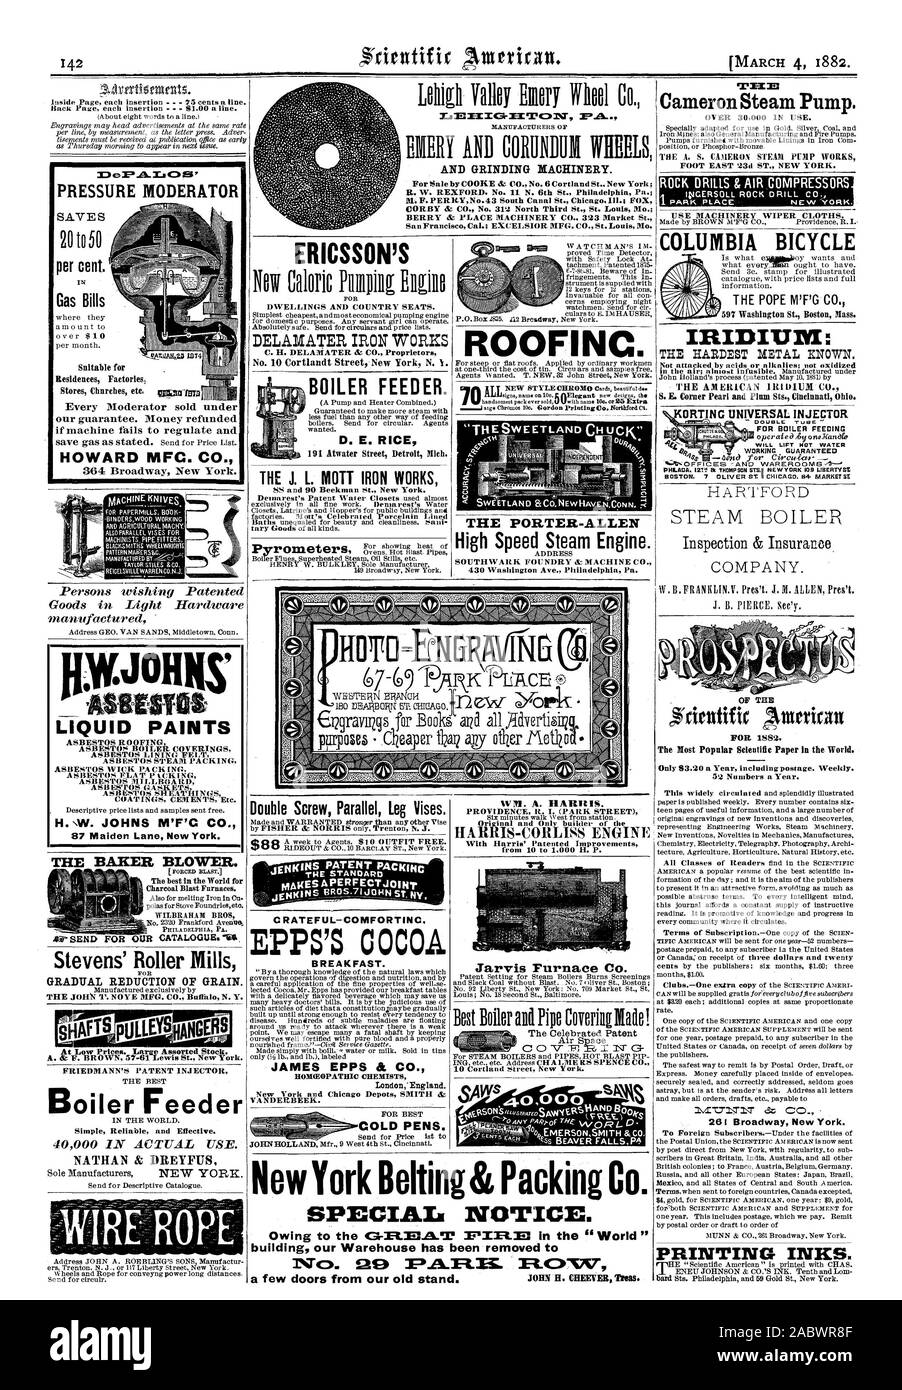 THE BAKER BLOWER. The best in the World for Charcoal Blast Furnaces. WILBRAHAM BROS Stevens' Roller Mills FOR GRADUAL REDUCTION OF GRAIN. THE JOHN T. NOYE MFG. CO. Buffal N. Y. At Low Prices. Large Assorted Stock. A. & F. BROWN 57-61 Lewis St. New York. FRIEDMANN'S PATENT INJECTOR THE BEST Boiler Feeder IN THE WORLD. Simple Reliable and Effective. 40000 IN ACTUAL USE. NATHAN & DREYFUS LIQUID PAINTS ASBESTOS ROOFING ASBESTOS BOILER COVERINGS ASBESTOS LINING FELT ASBESTOS STEAM PACKING ASBESTOS WICK PACK INC. ASBESTOS FLAT P t.CKI NG ASBESTOS MILLBOARD ASBES'EOS GA.SK ETS ASBESTOS SHEATHINGS Stock Photo